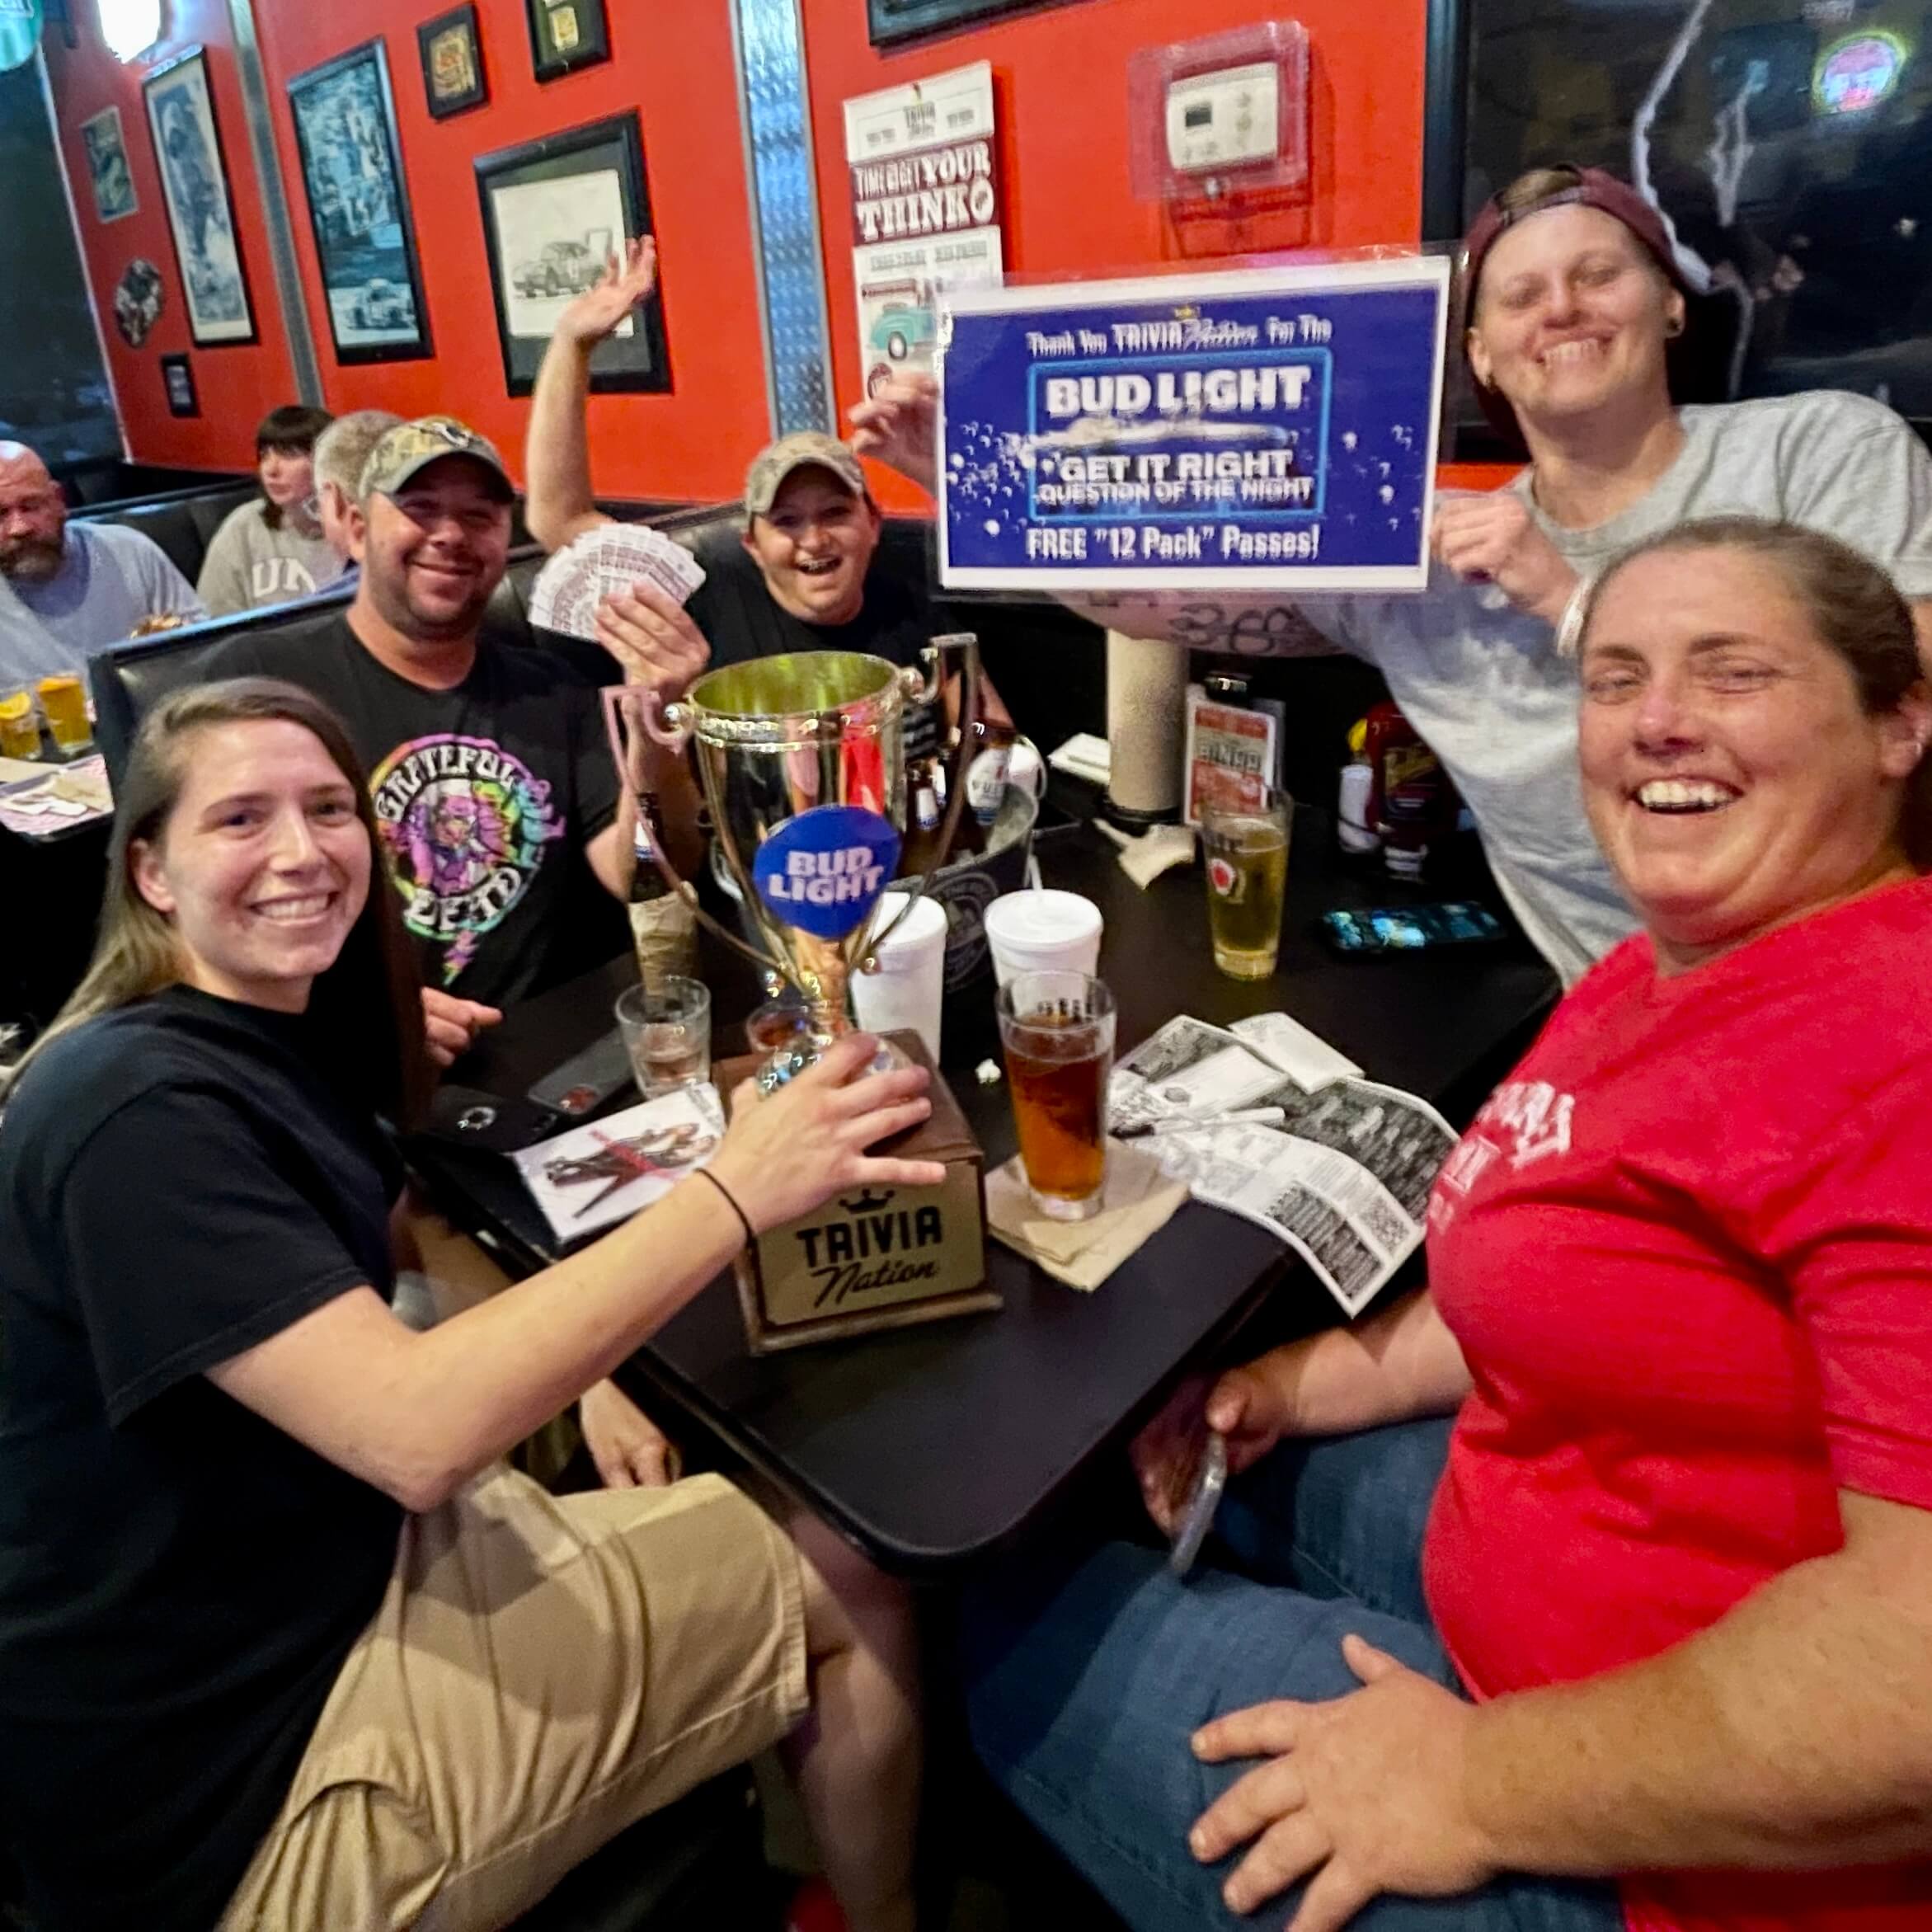 Dick's Wings and Grill Jacksonville FL 32225 trivia night 6